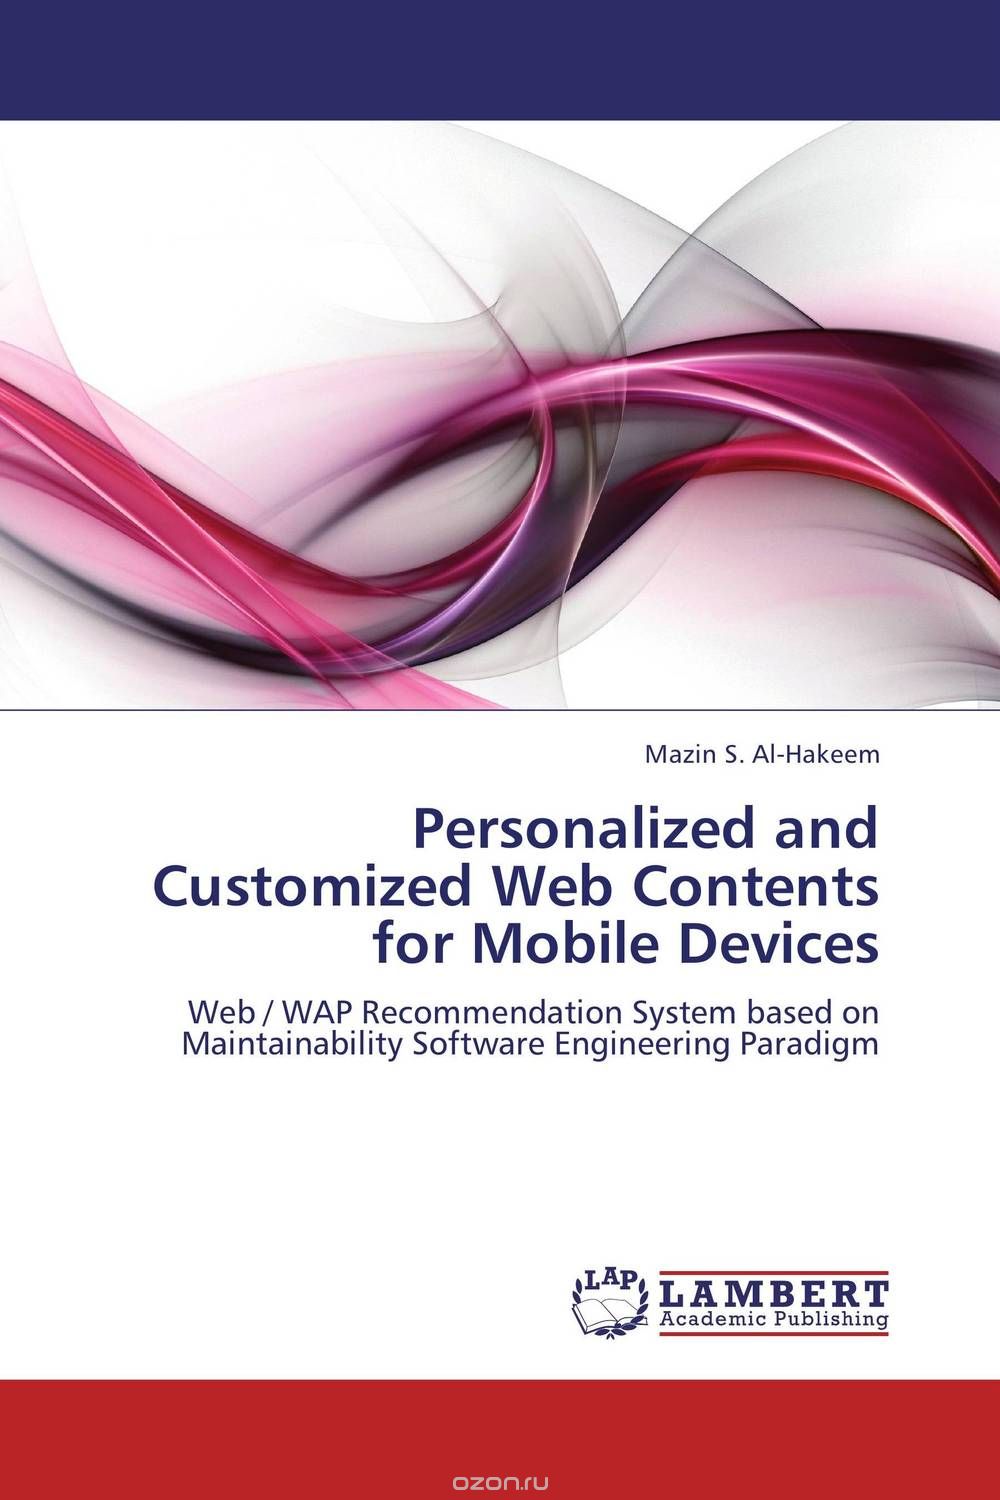 Скачать книгу "Personalized and Customized Web Contents for Mobile Devices"